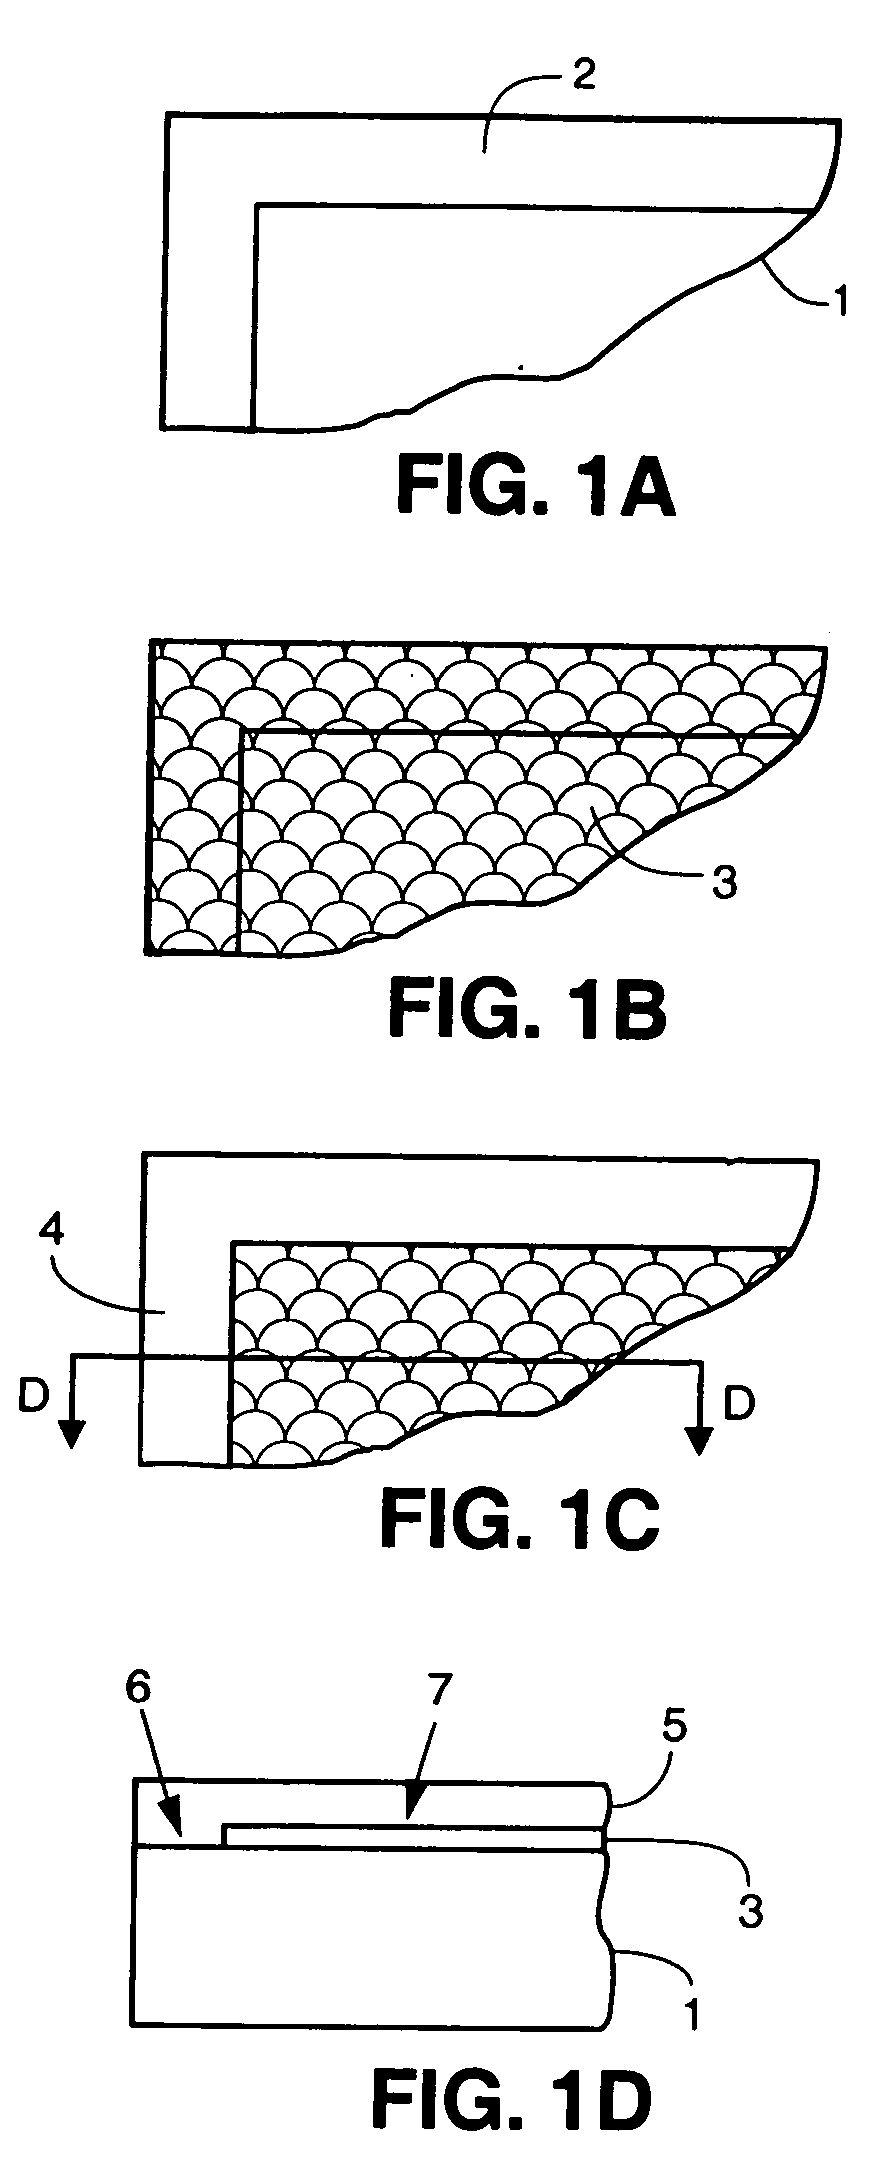 Fabrication methods for electronic system modules